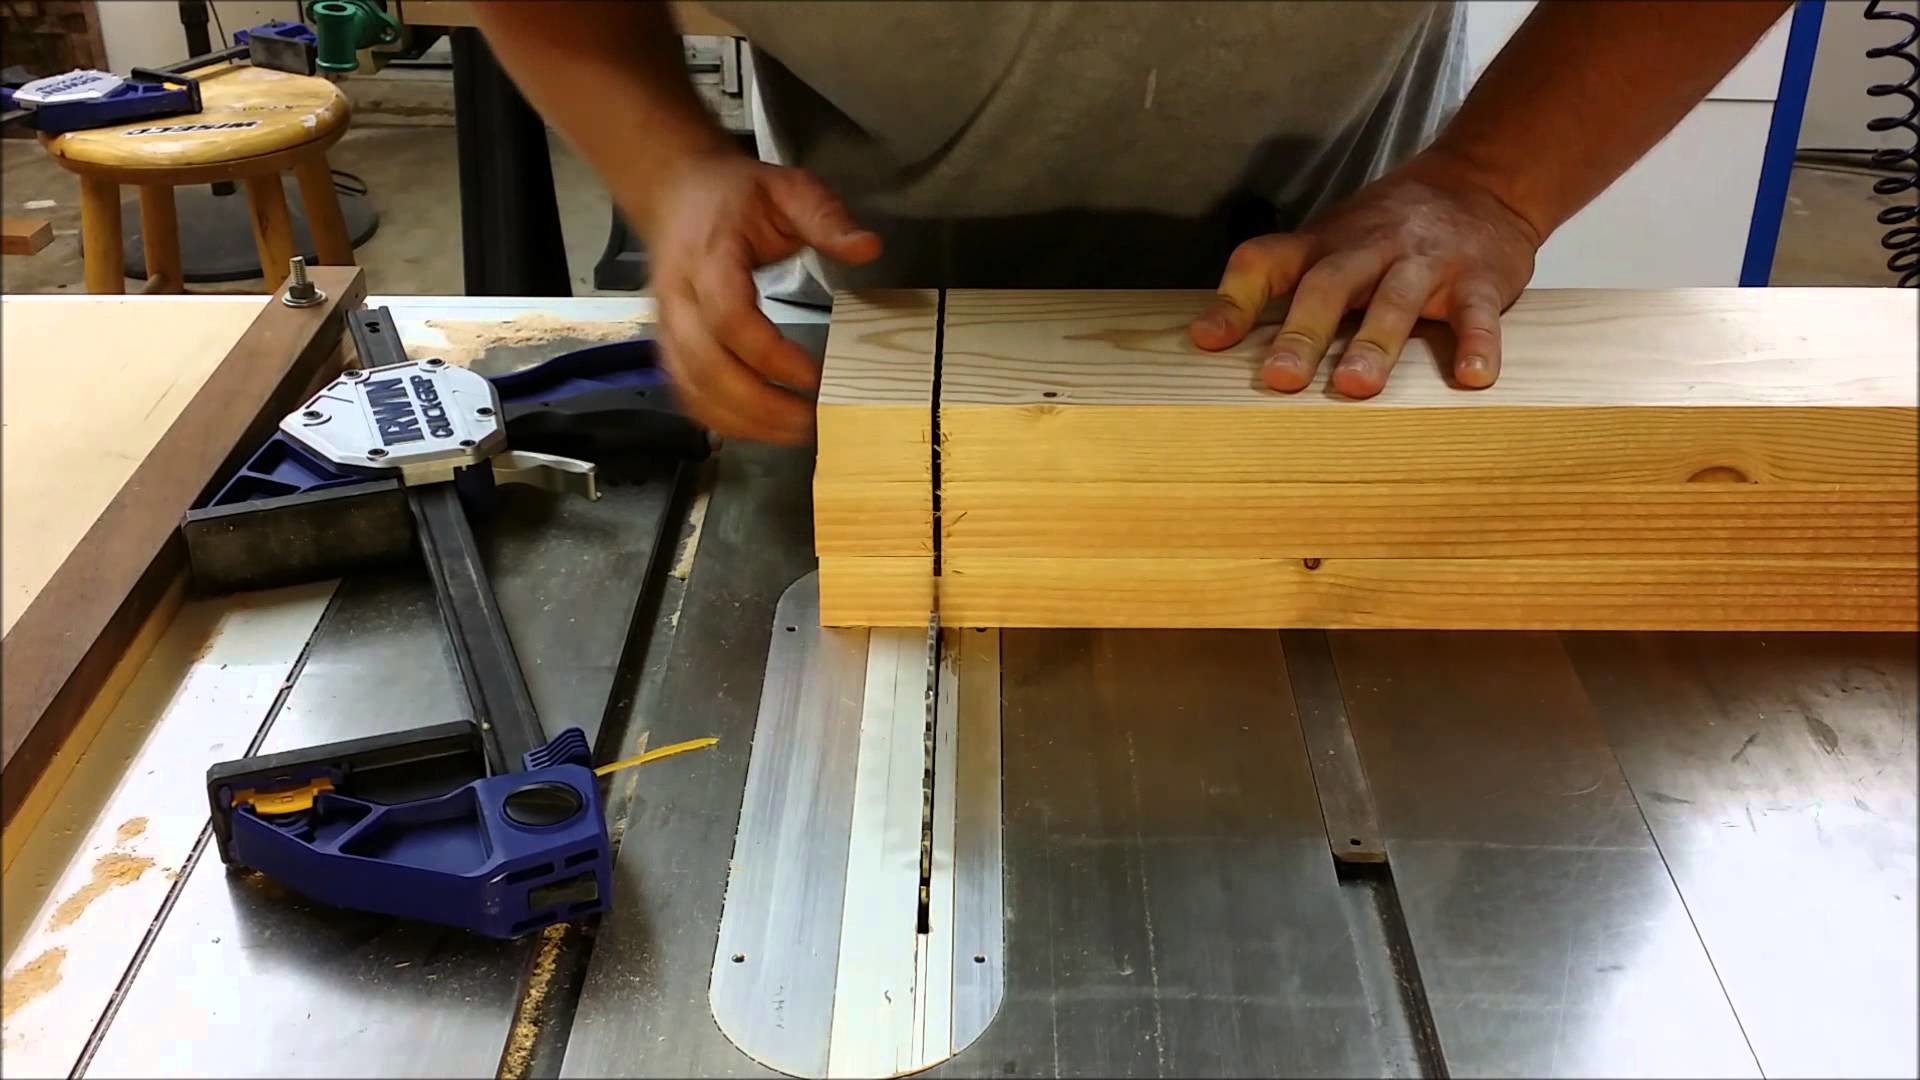 How,to,Cut,Thick,Wood,on,a,Table,Saw,Cutting,thick,work,bench,legs,on,the,t...